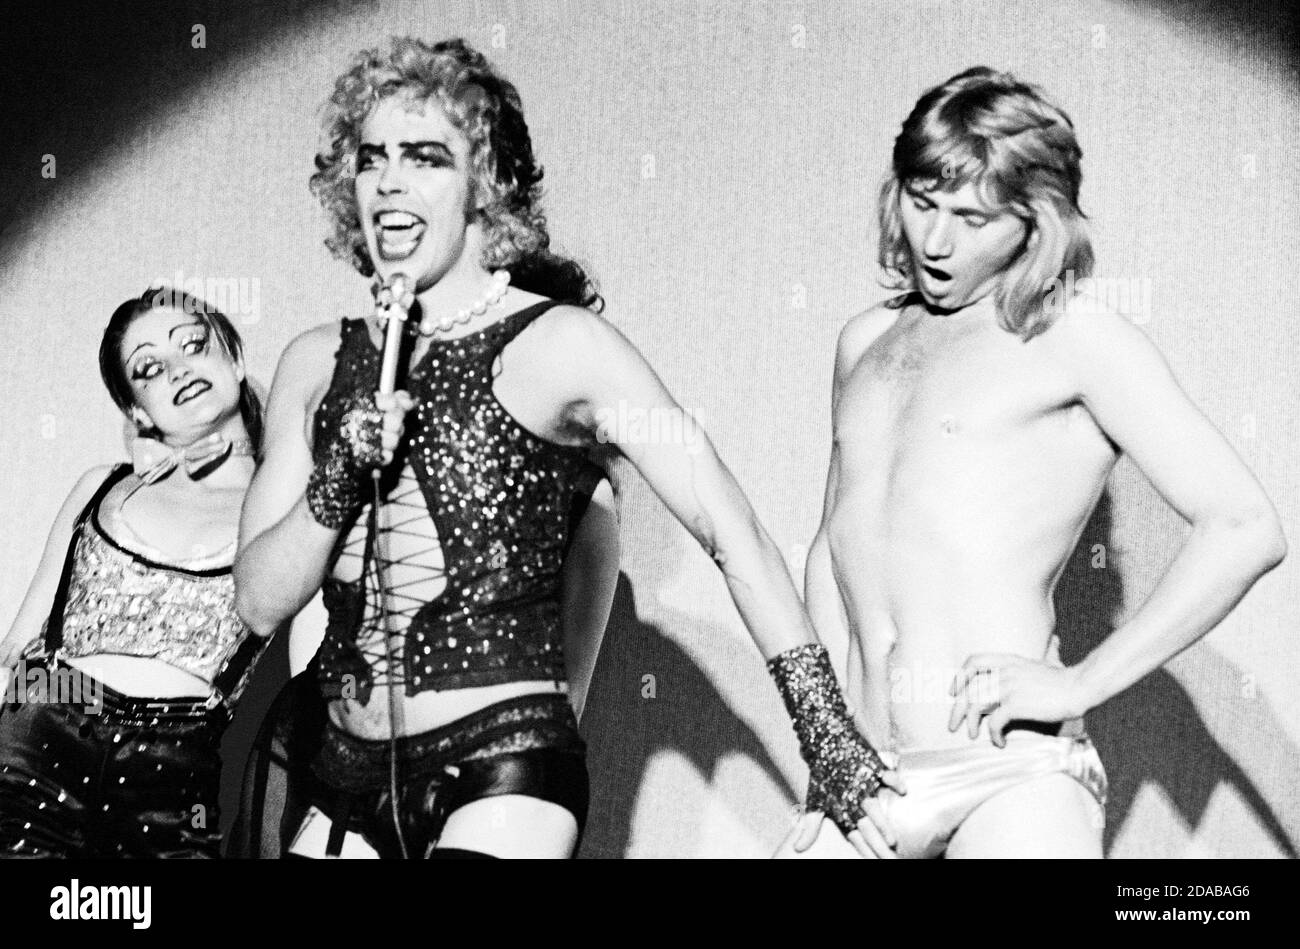 l-r: Little Nell (Columbia), Tim Curry (Frank-n-furter), Rayner Bourton (Rocky Horror) in THE ROCKY HORROR SHOW at the Chelsea Classic Cinema, London SW3 14/08/1973  transfer from the the Theatre Upstairs, Royal Court Theatre  book, music & lyrics by Richard O'Brien  set design: Brian Thomson  costumes: Sue Blane  lighting: Gerry Jenkinson  director: Jim Sharman Stock Photo